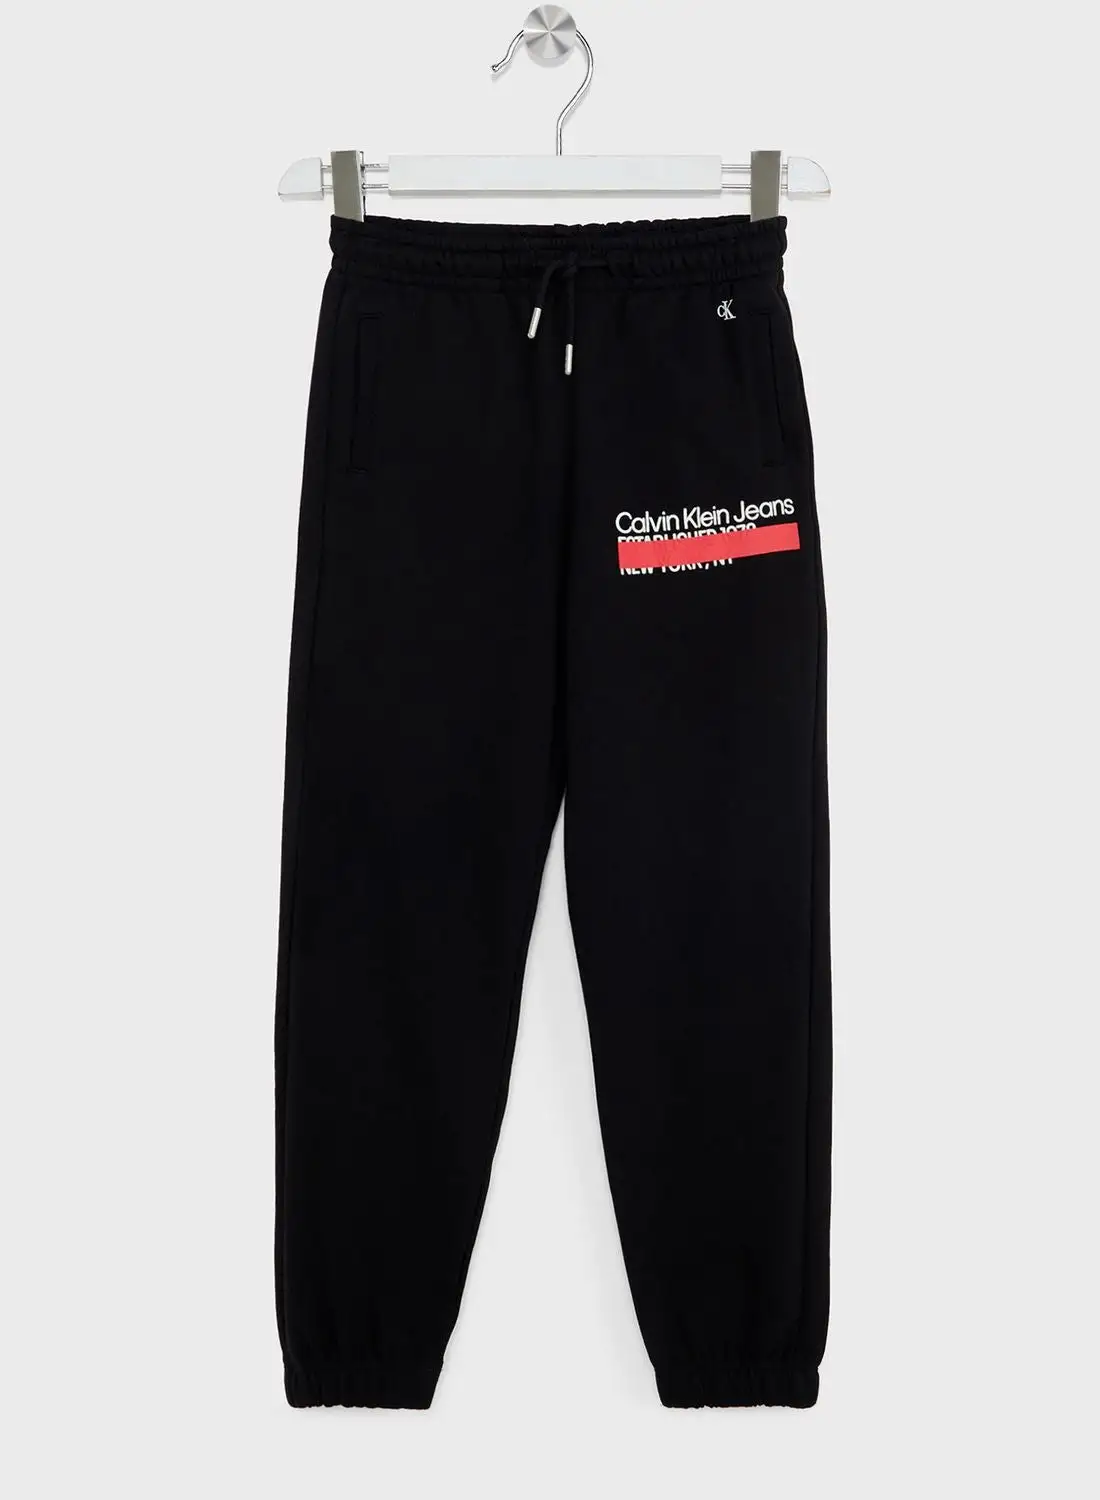 Calvin Klein Jeans Kids Hero Relaxed Fit Sweatpants